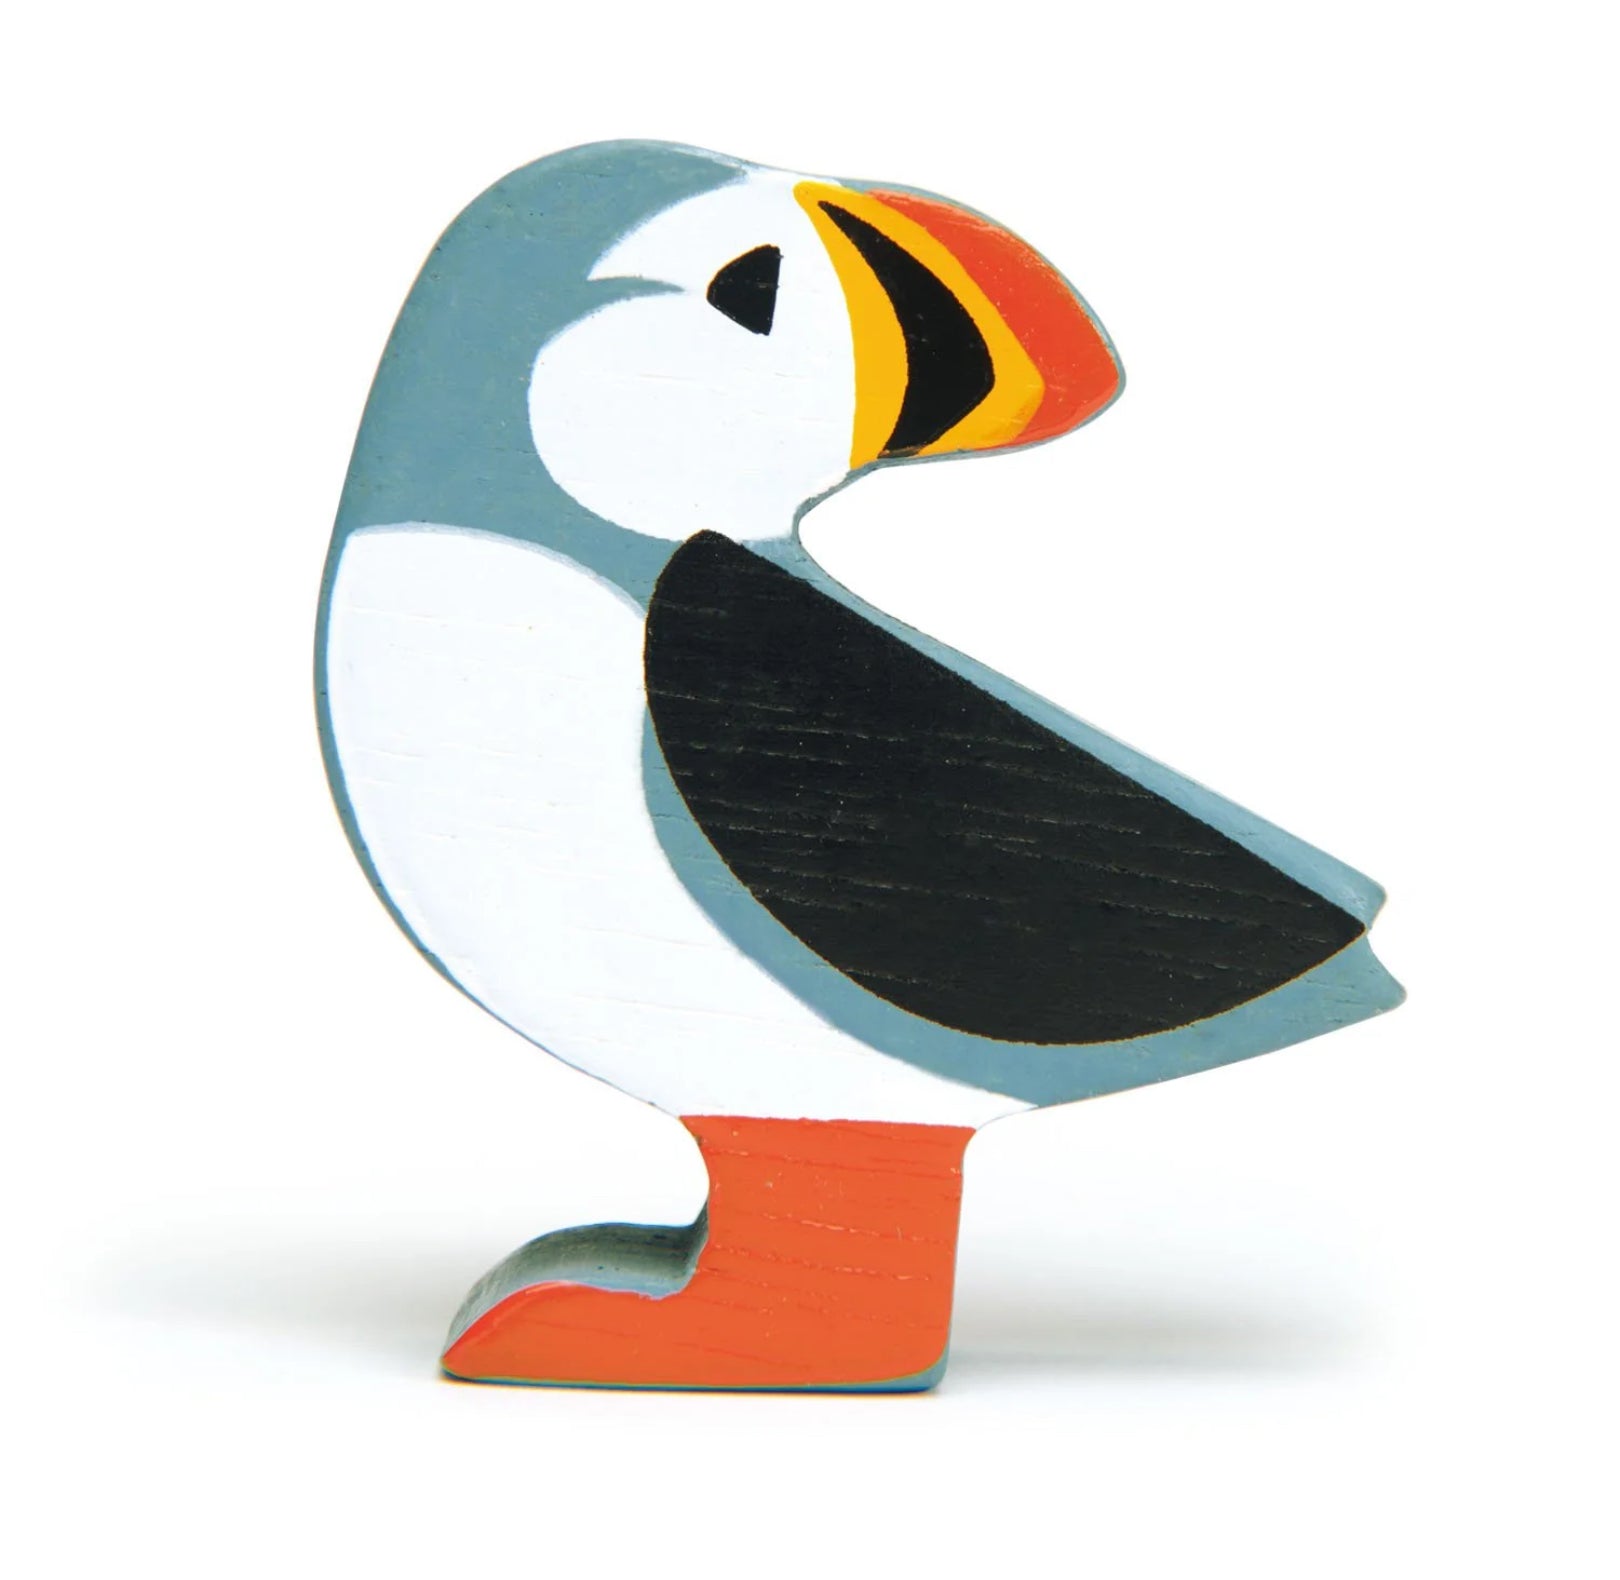 Tender Leaf Toys Puffin Wooden Toy